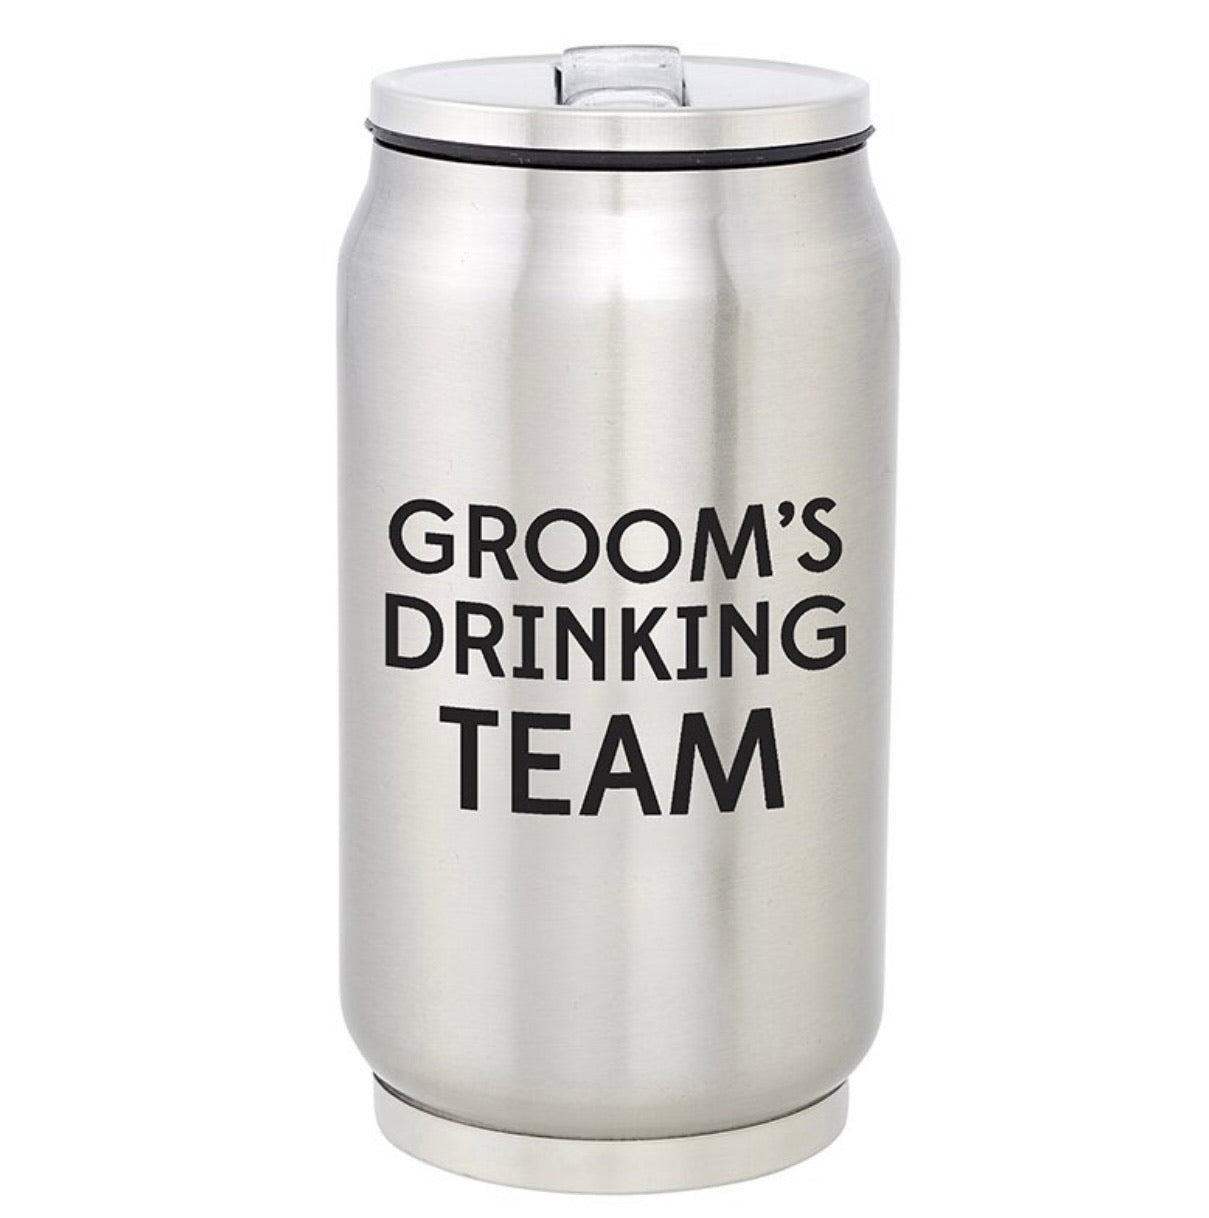 Grooms Drinking Team - Insulated Cup